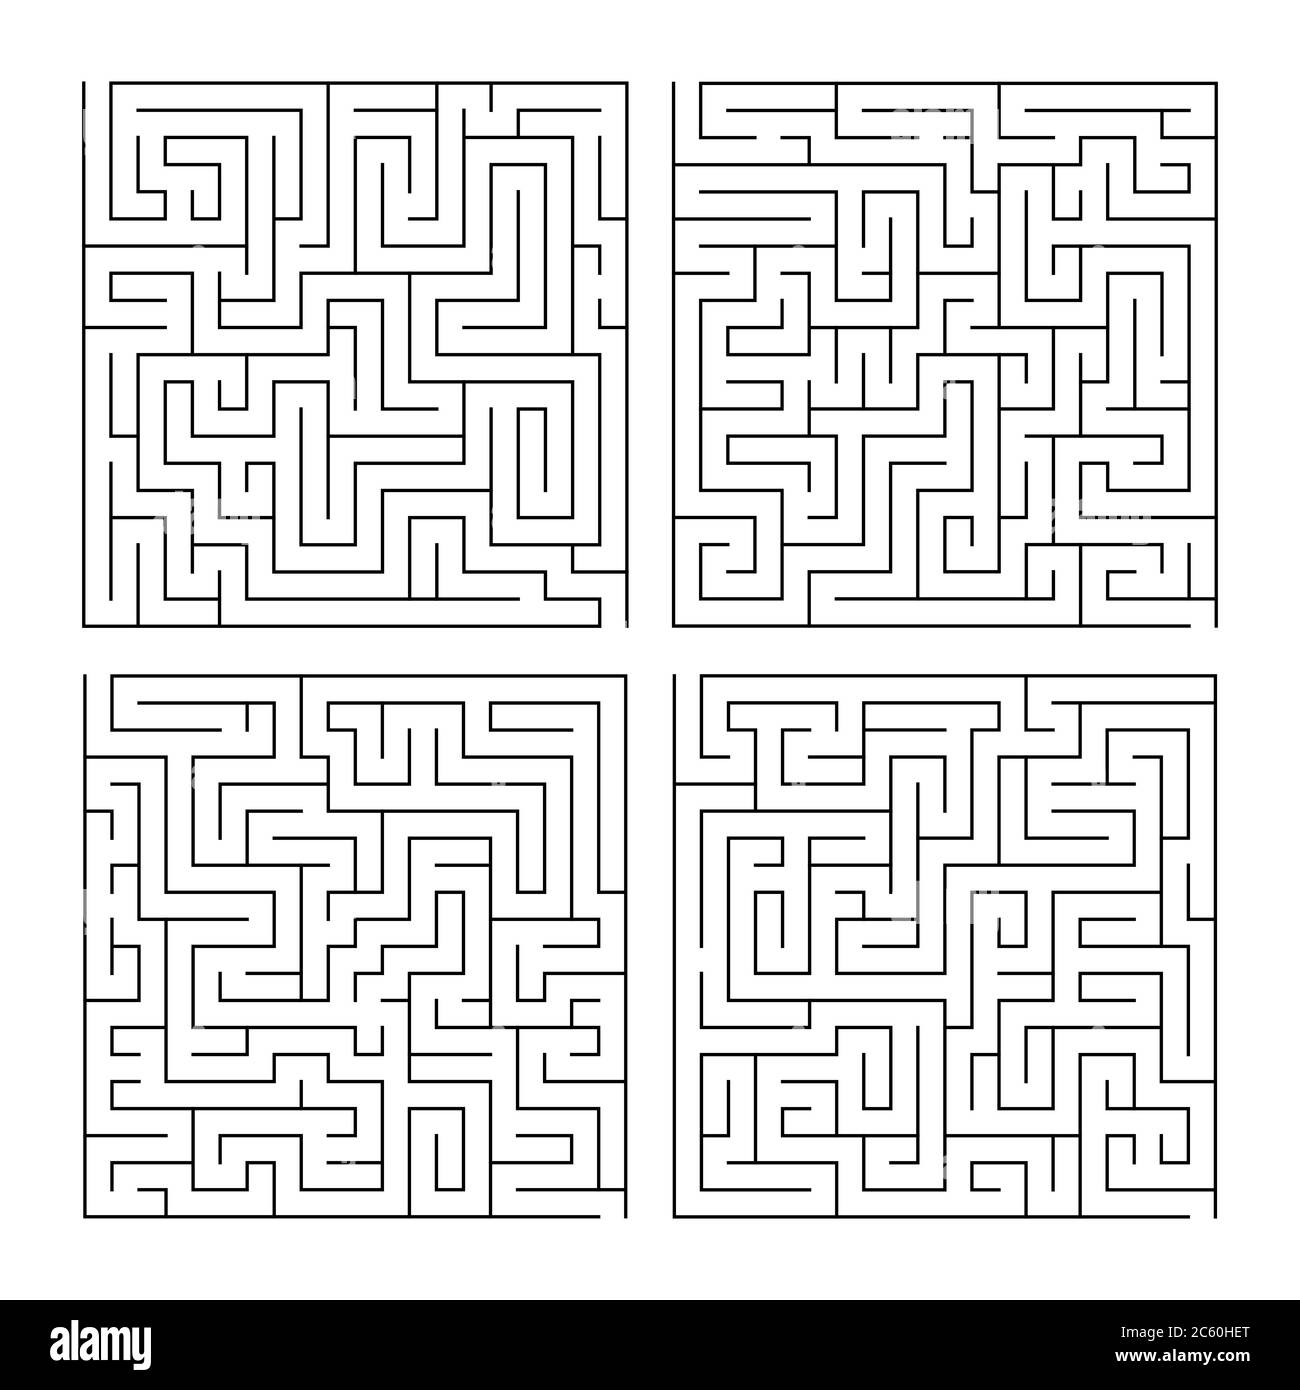 https://c8.alamy.com/comp/2C60HET/labyrinth-maze-game-set-for-children-simple-puzzle-collection-isolated-on-white-background-vector-illustration-2C60HET.jpg